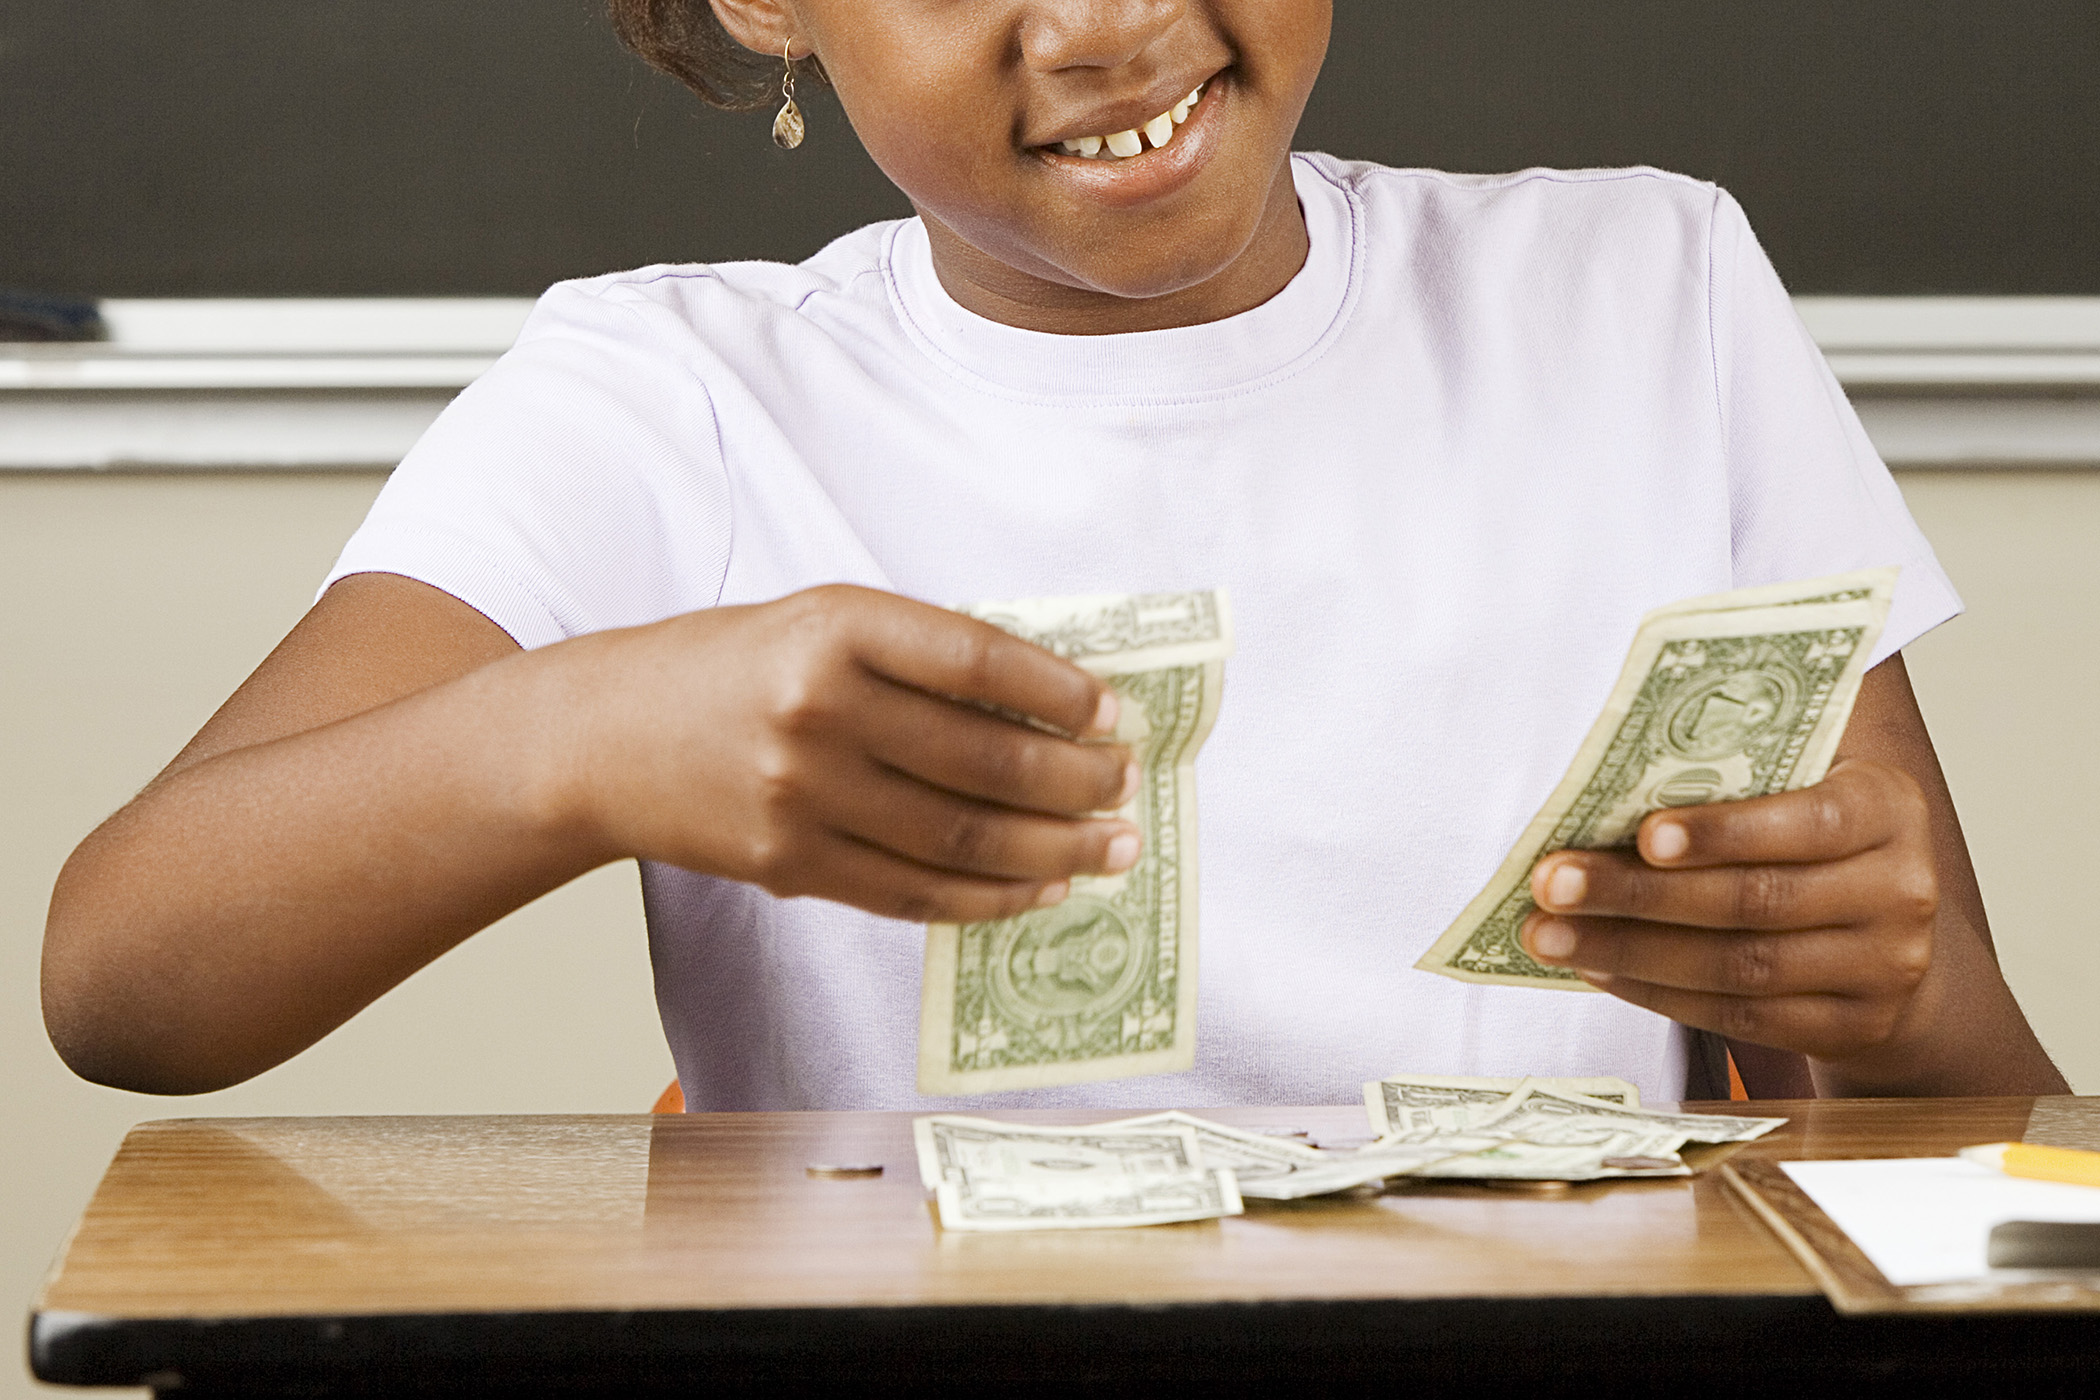 The Classroom Exercise That Turned Fourth-Graders Into Smarter Money Managers